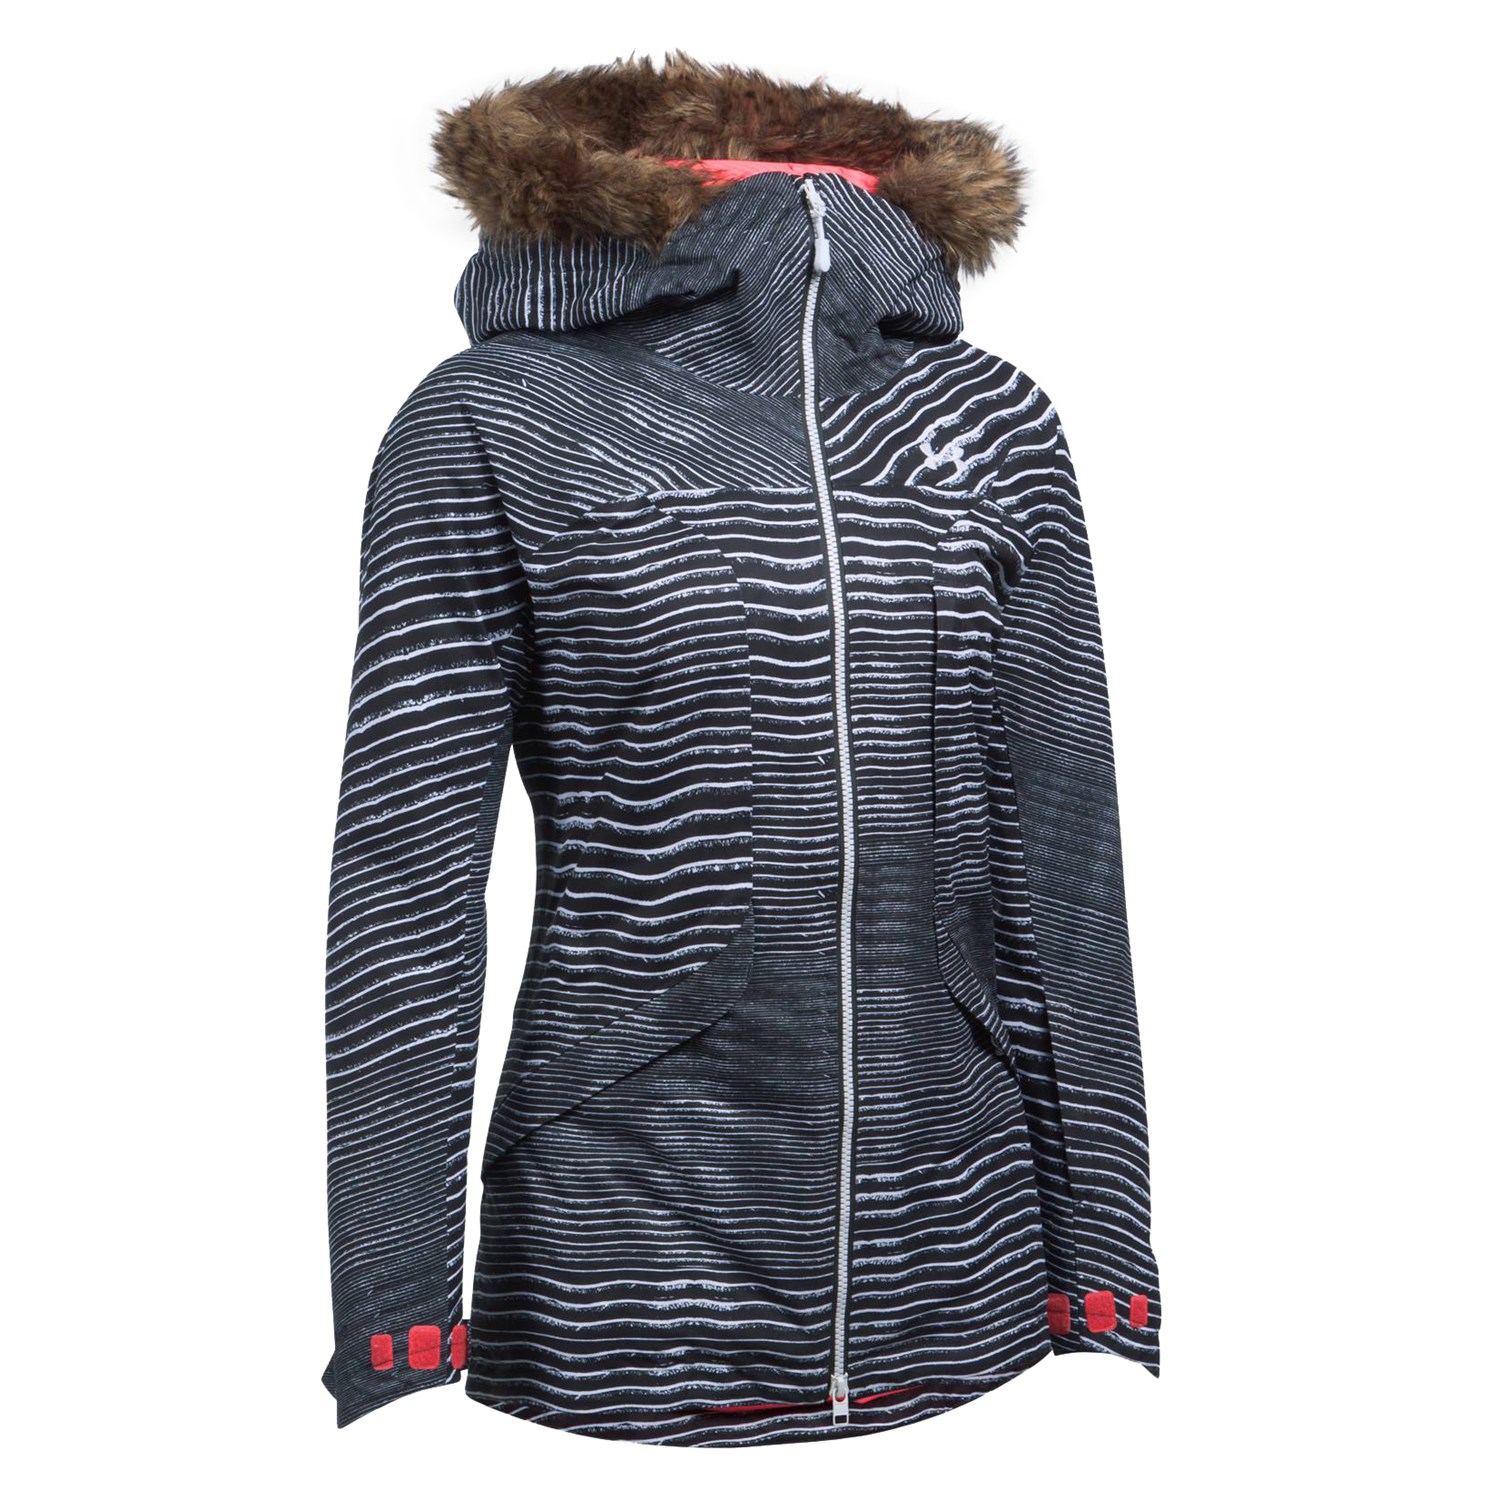 under armour infrared jacket womens